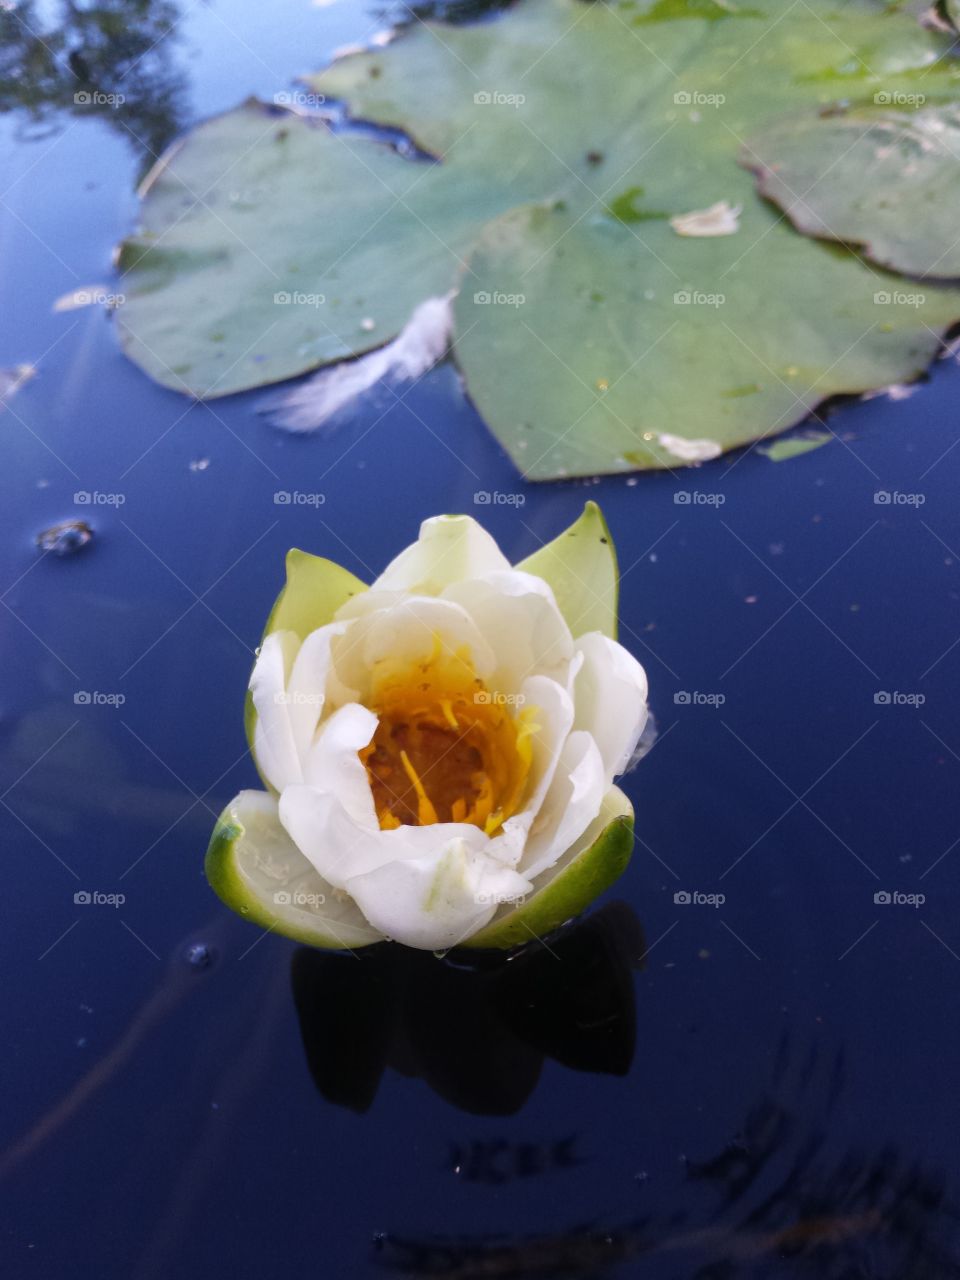 Lily in the water